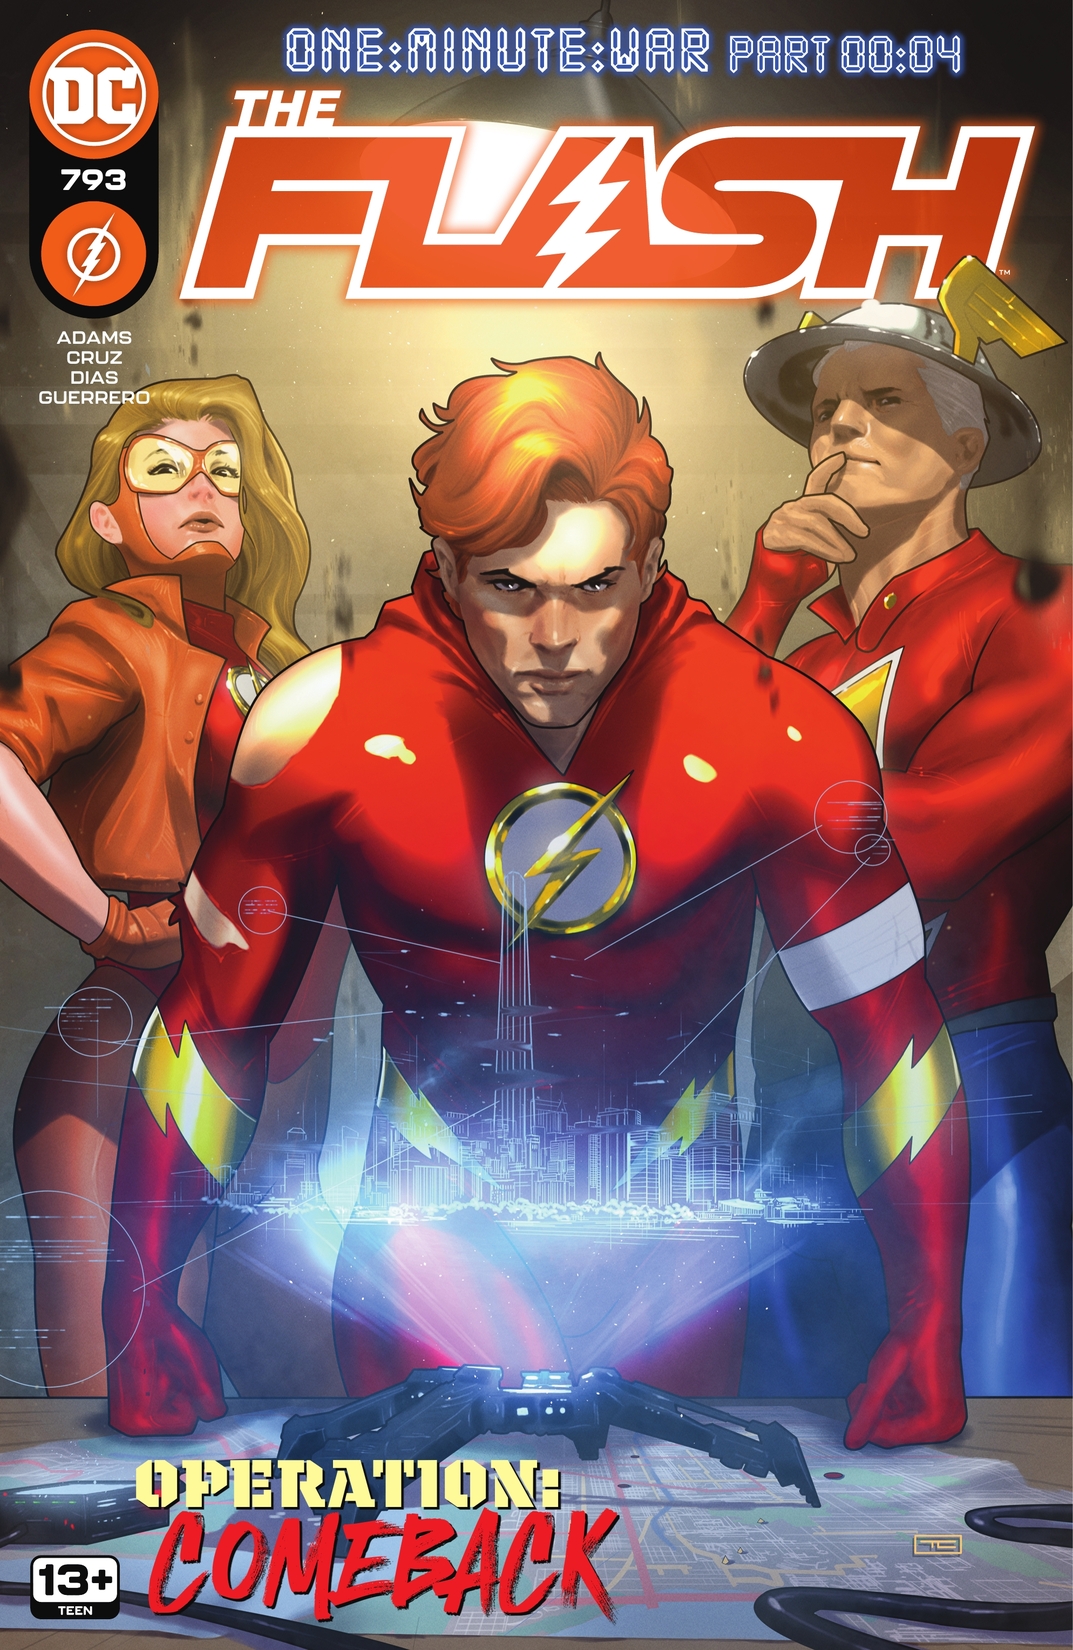 The Flash (2016-) #793 preview images